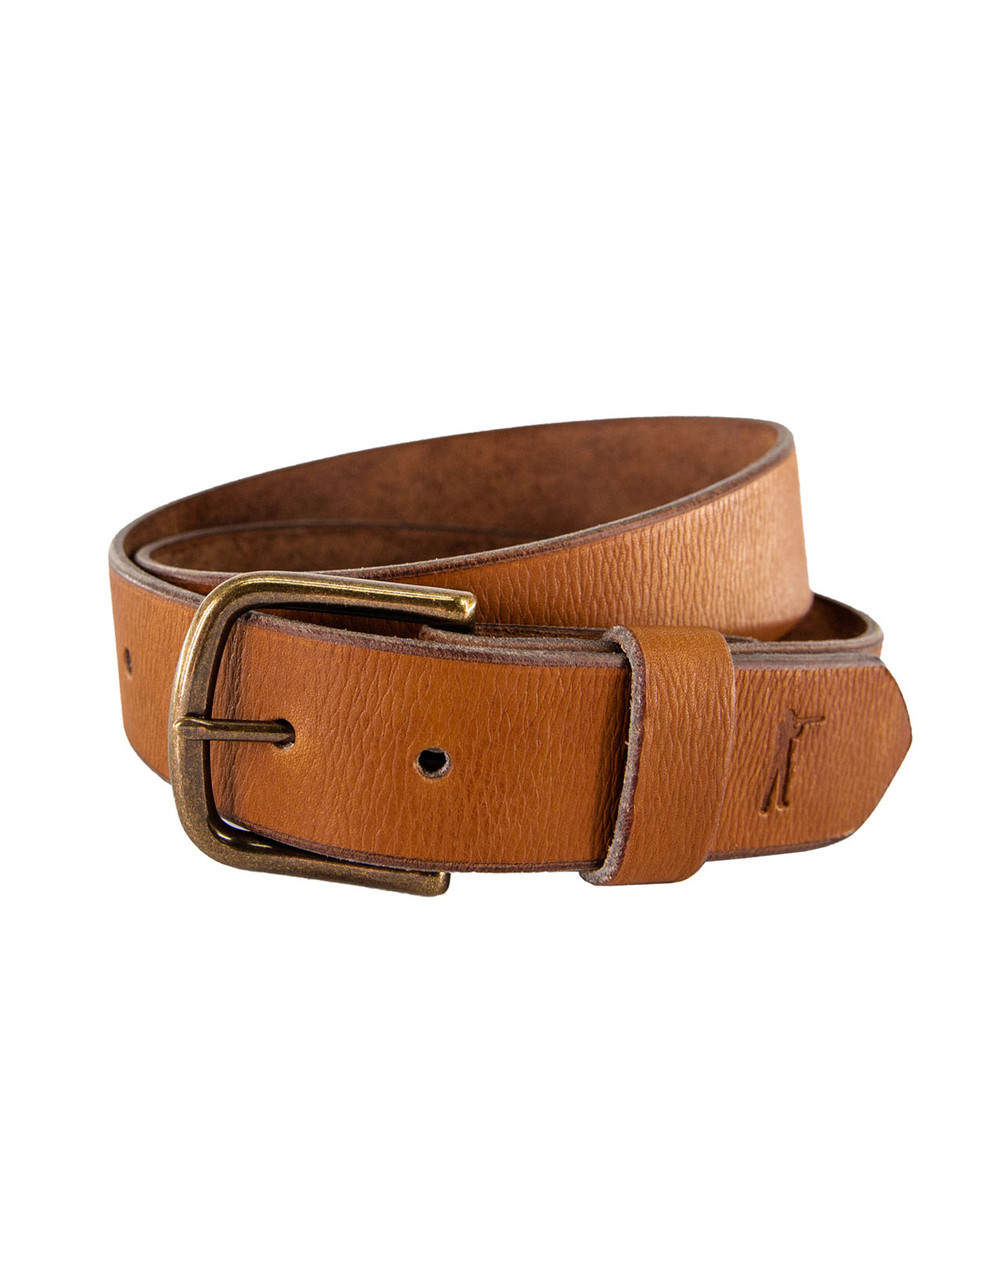 Last Belt You'll Ever Buy in Signature Leather - Ball and Buck